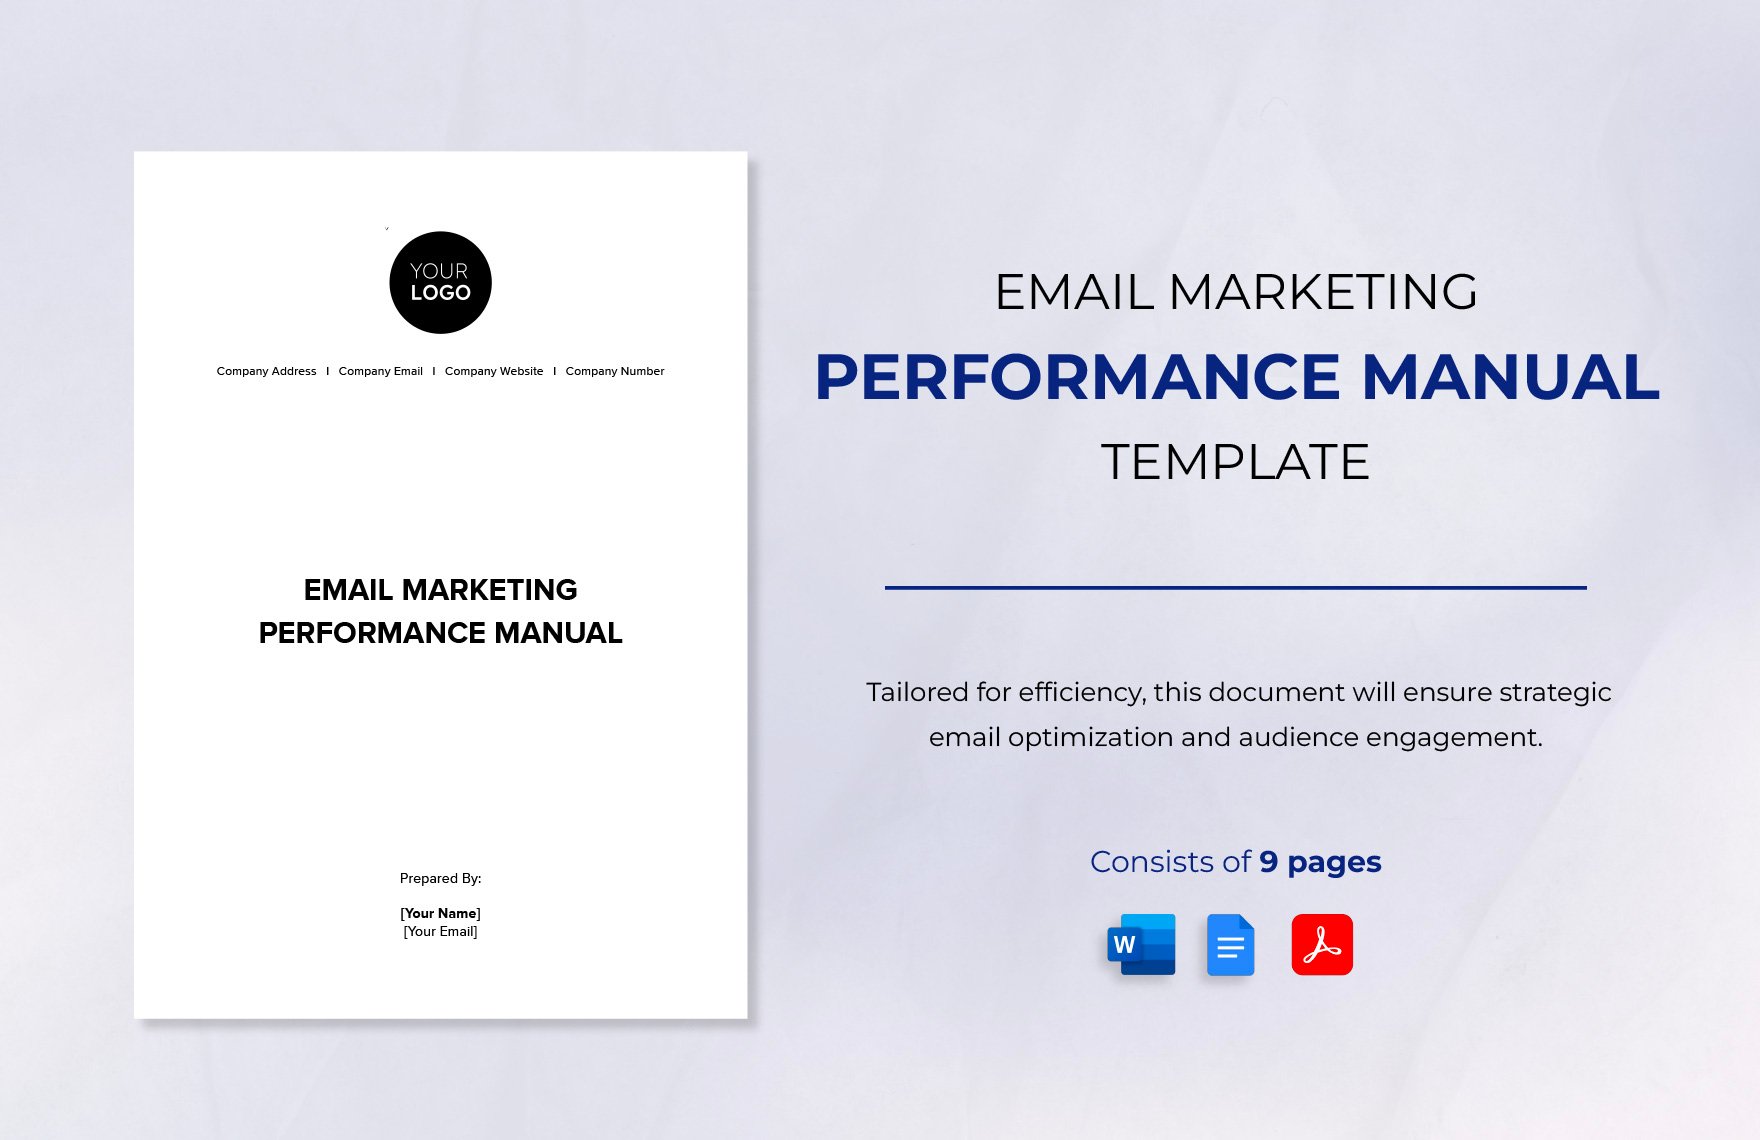 Email Marketing Performance Manual Template in Word, Google Docs, PDF